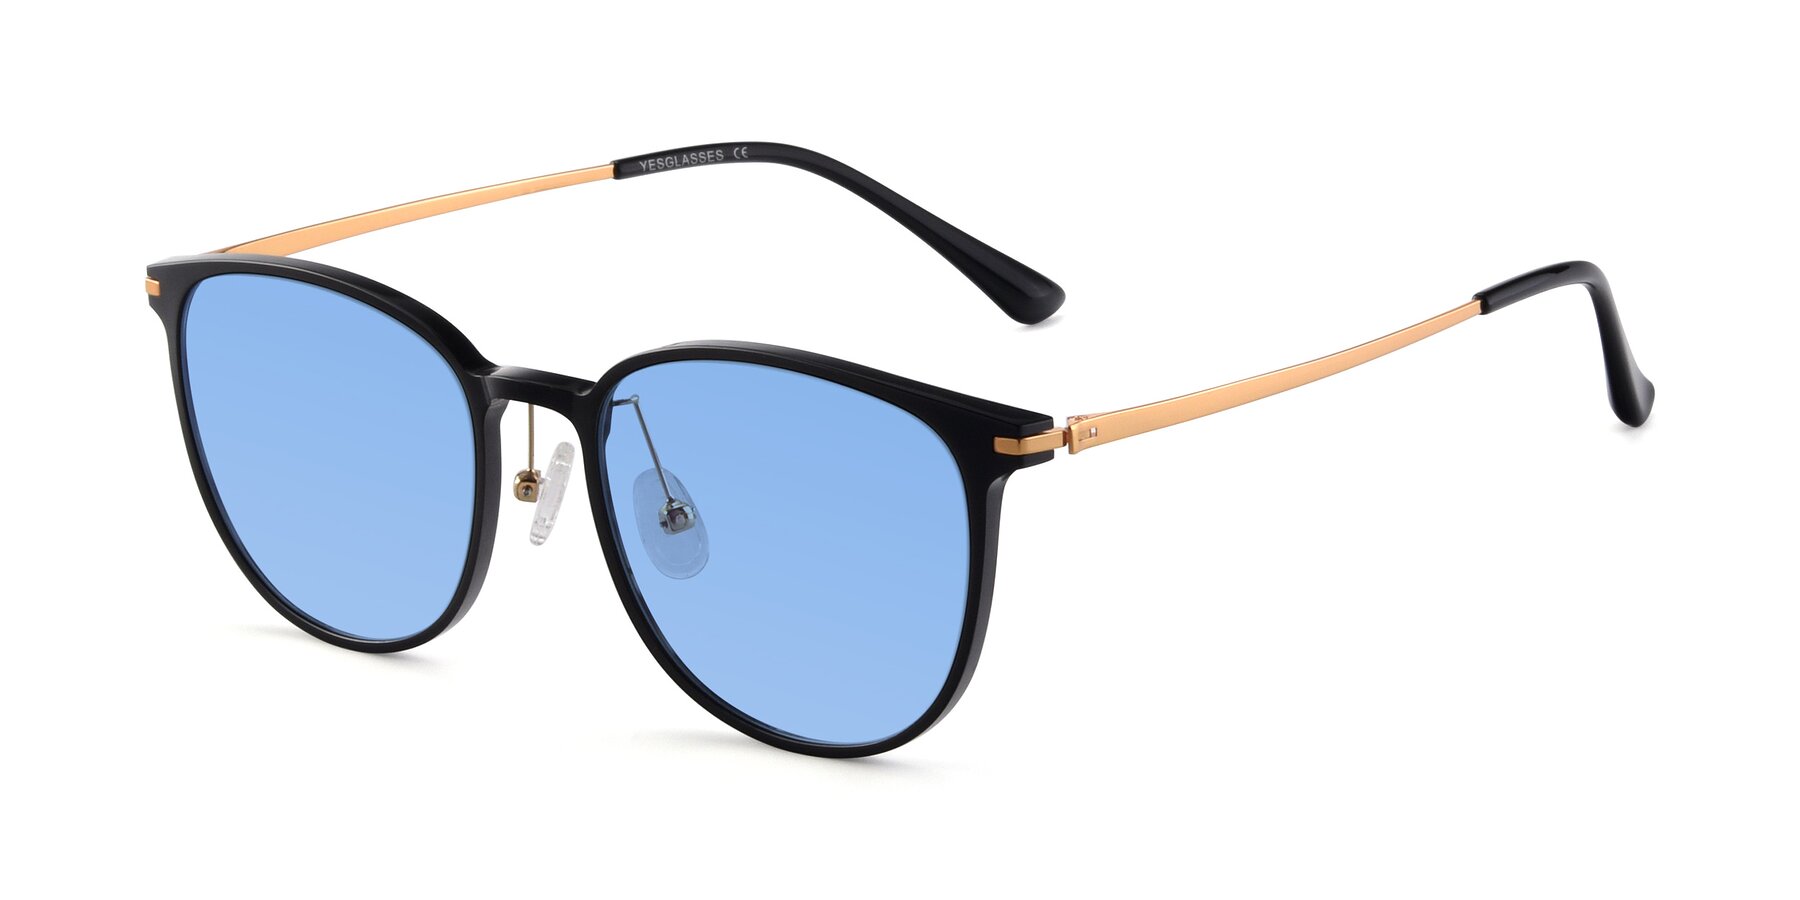 Angle of Justice in Black with Medium Blue Tinted Lenses